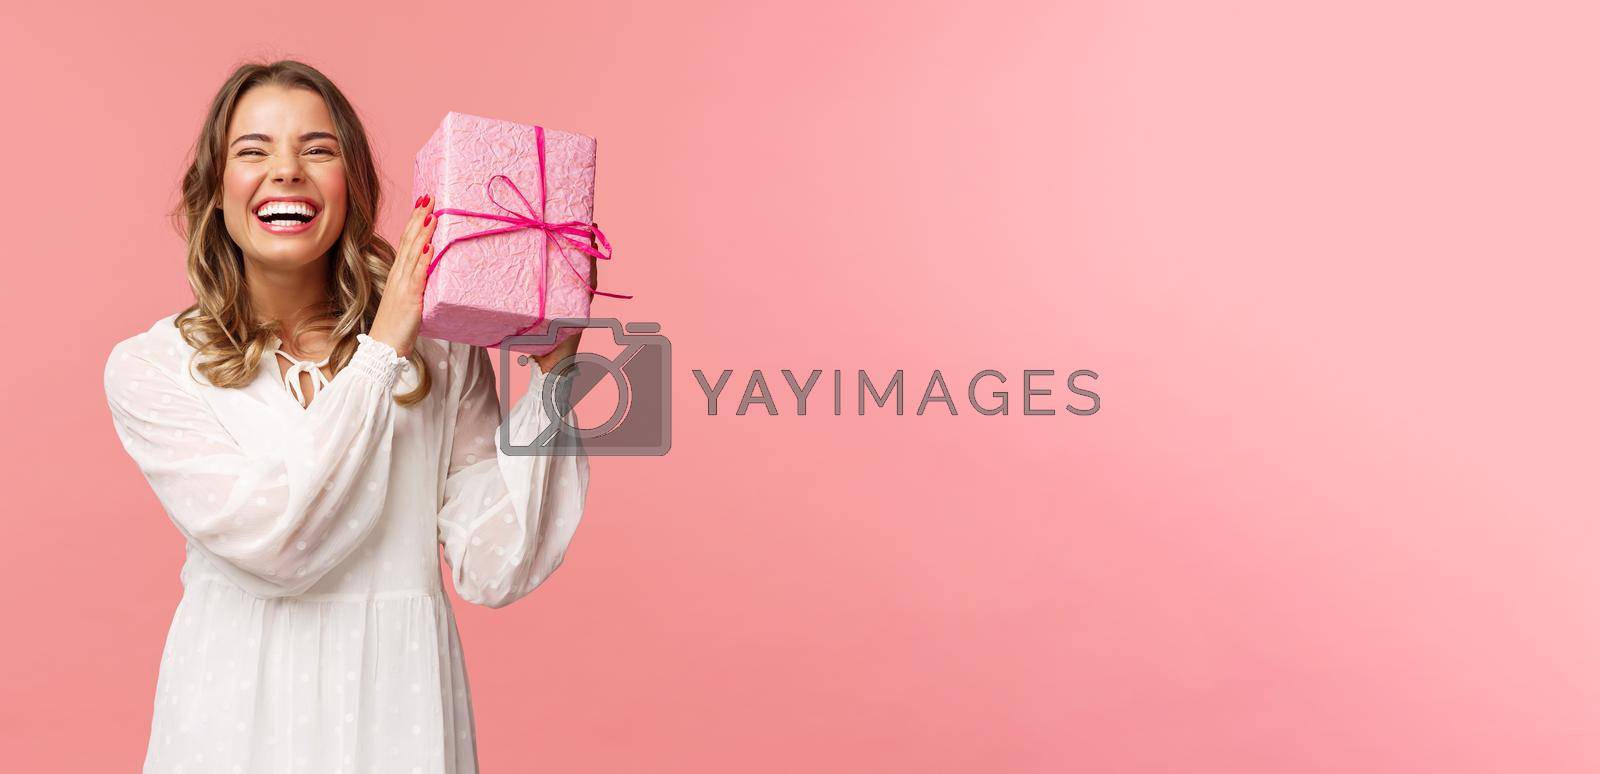 Holidays, celebration and women concept. Portrait of happy charismatic blond girl shaking gift box wondering whats inside as celebrating birthday, receive b-day presents, pink background.